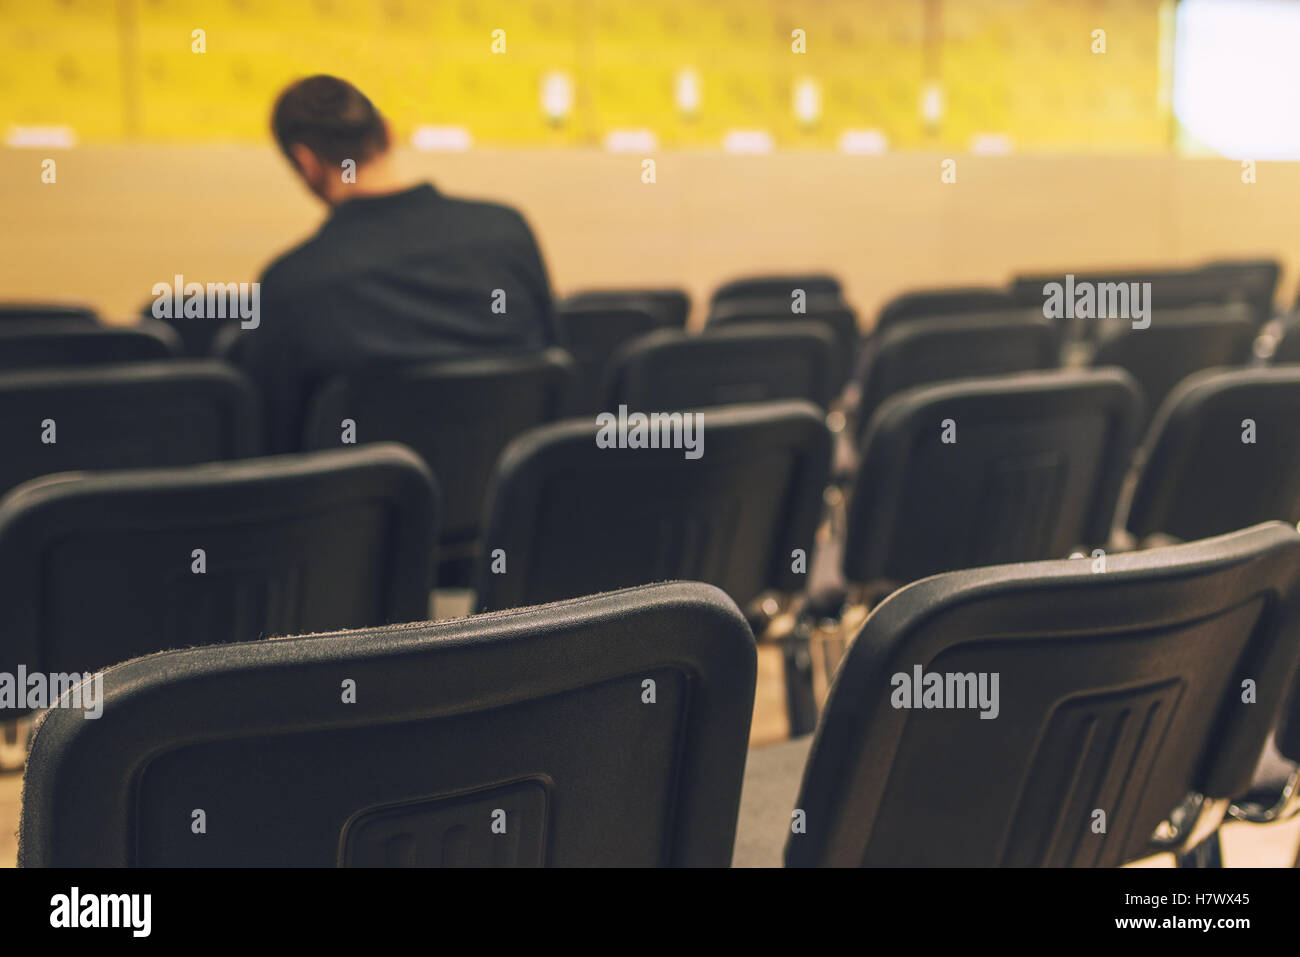 Unrecognizable journalist in press conference room, sitting alone among empty chairs, selective focus Stock Photo